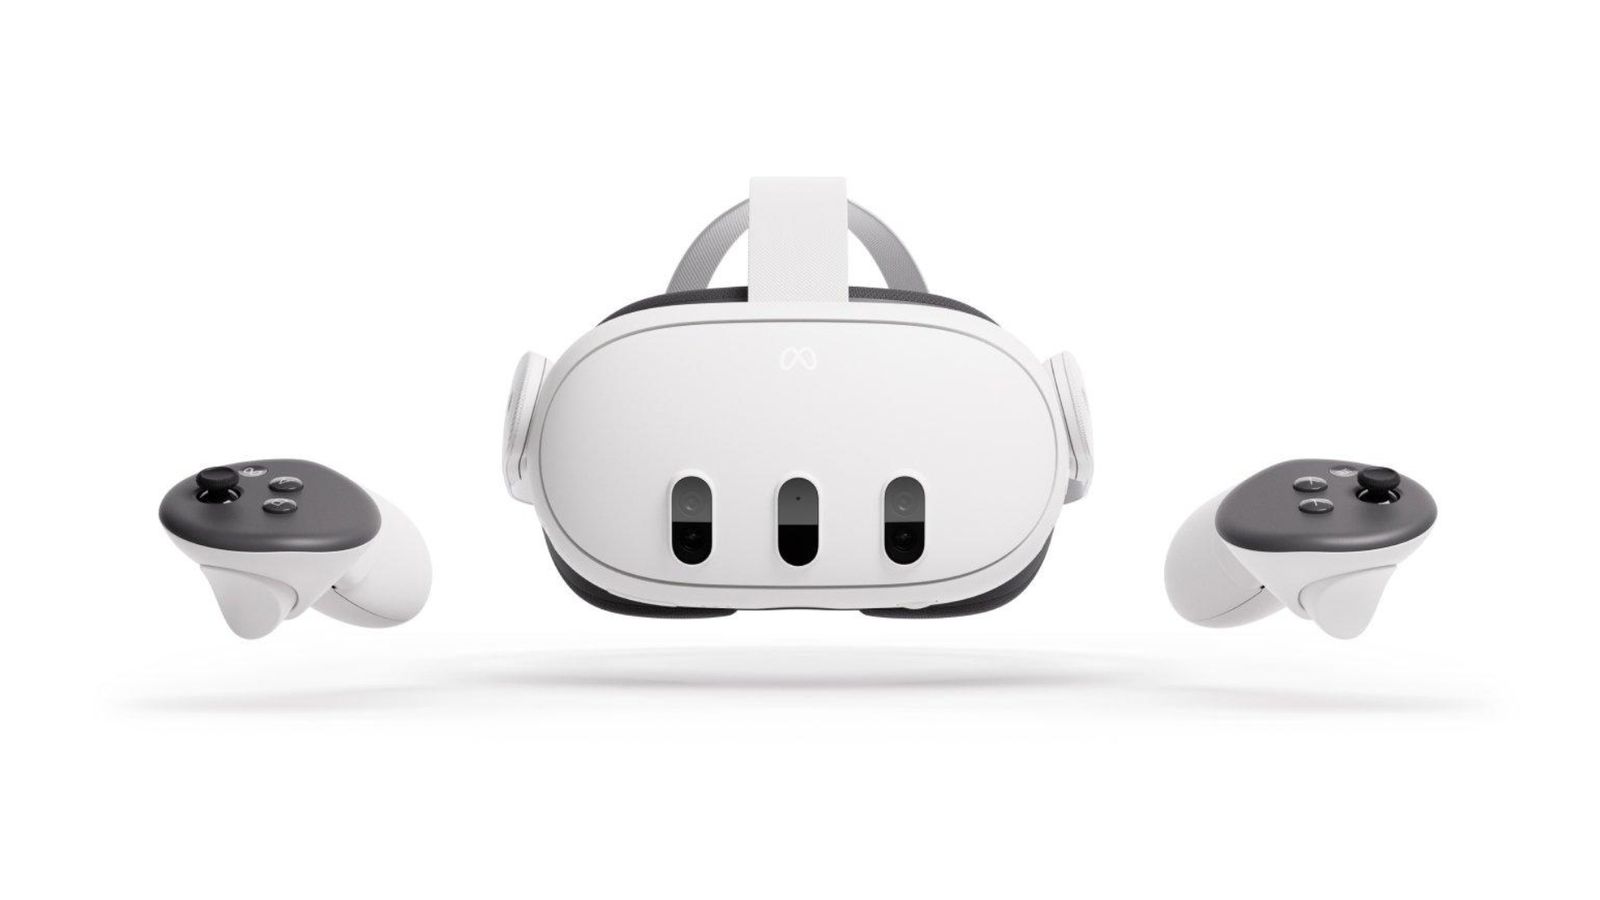 Meta Quest 3 product image of a white VR headset with two white and black controllers either side.